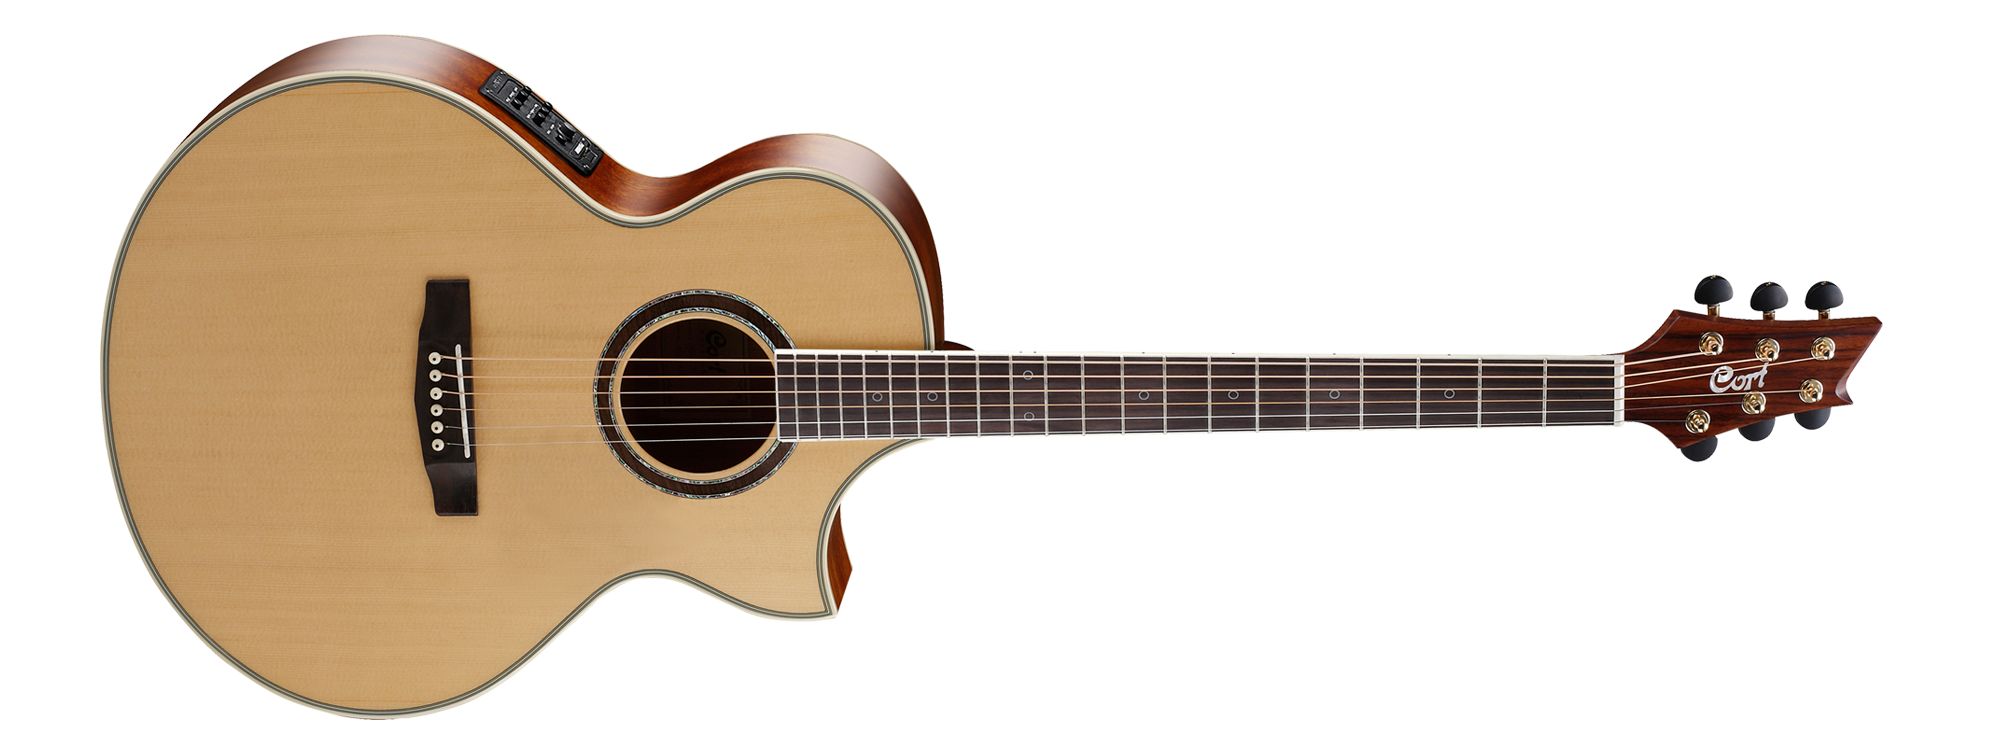 What Is The Purpose Of A Baritone Acoustic Guitar